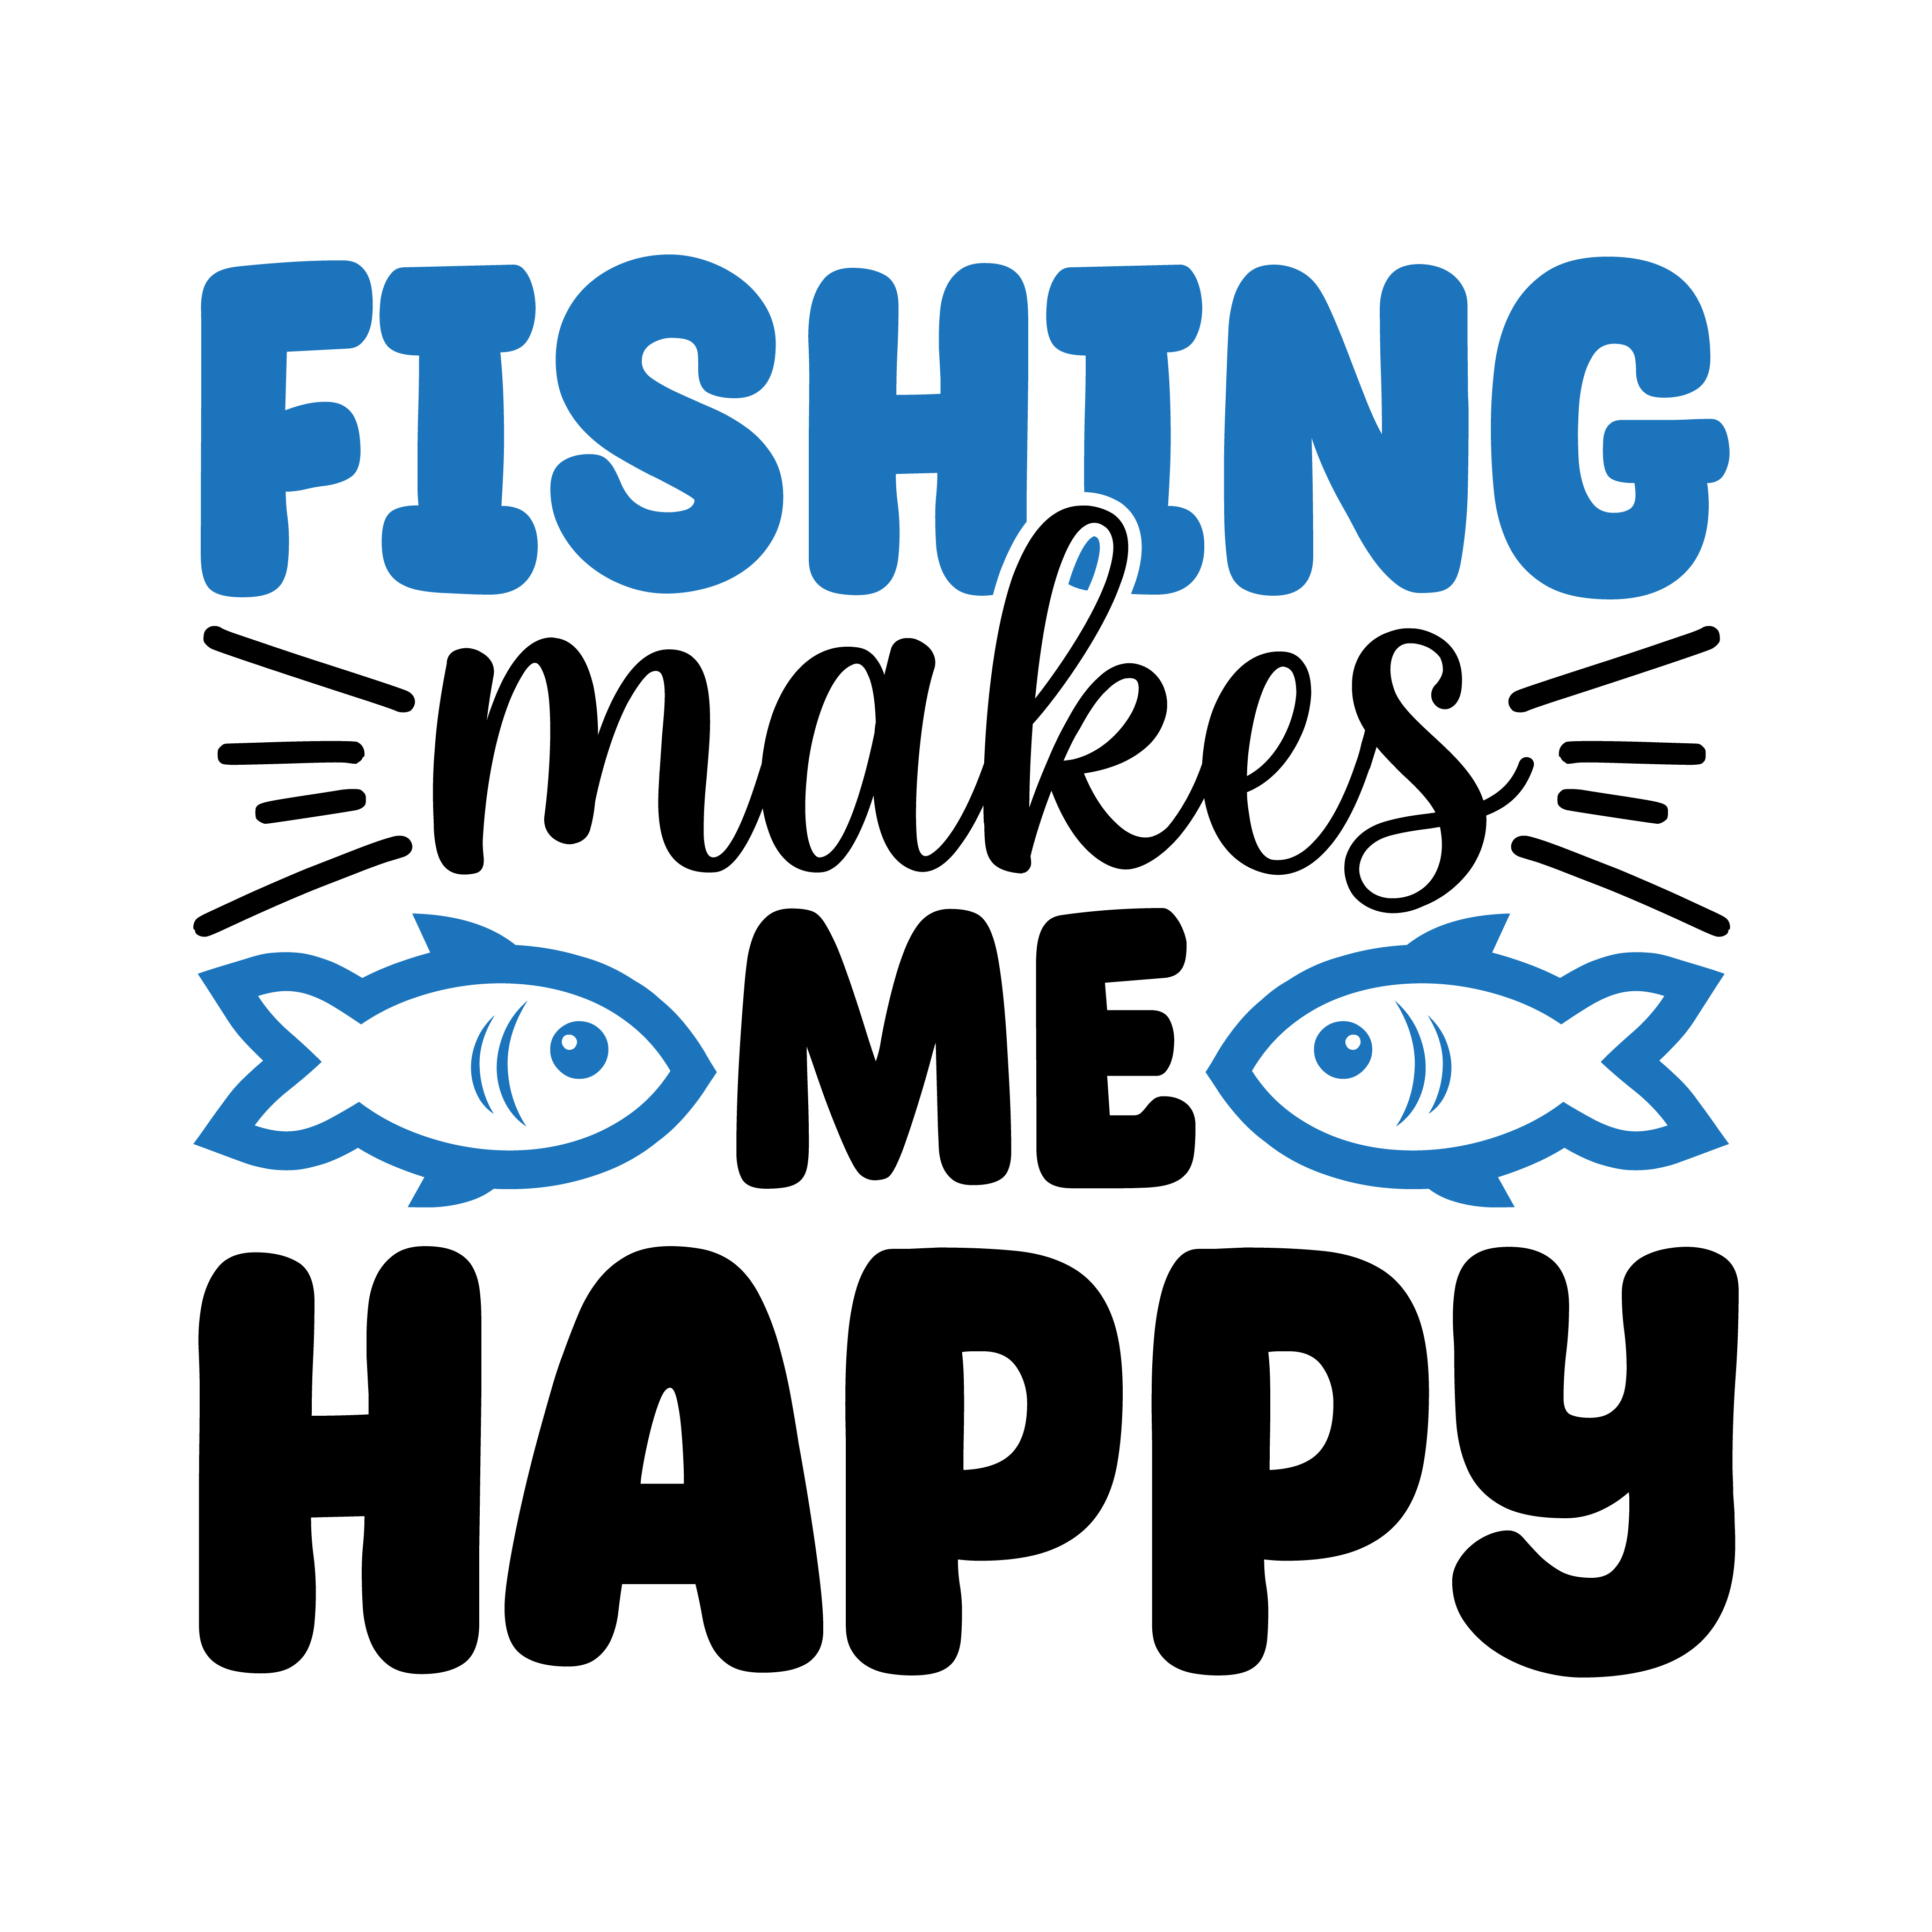 fishing makes me happy, Fishing quotes, fishing sayings, Cricut designs, free, clip art, svg file, template, pattern, stencil, silhouette, cut file, design space, short, funny, shirt, cup, DIY crafts and projects, embroidery